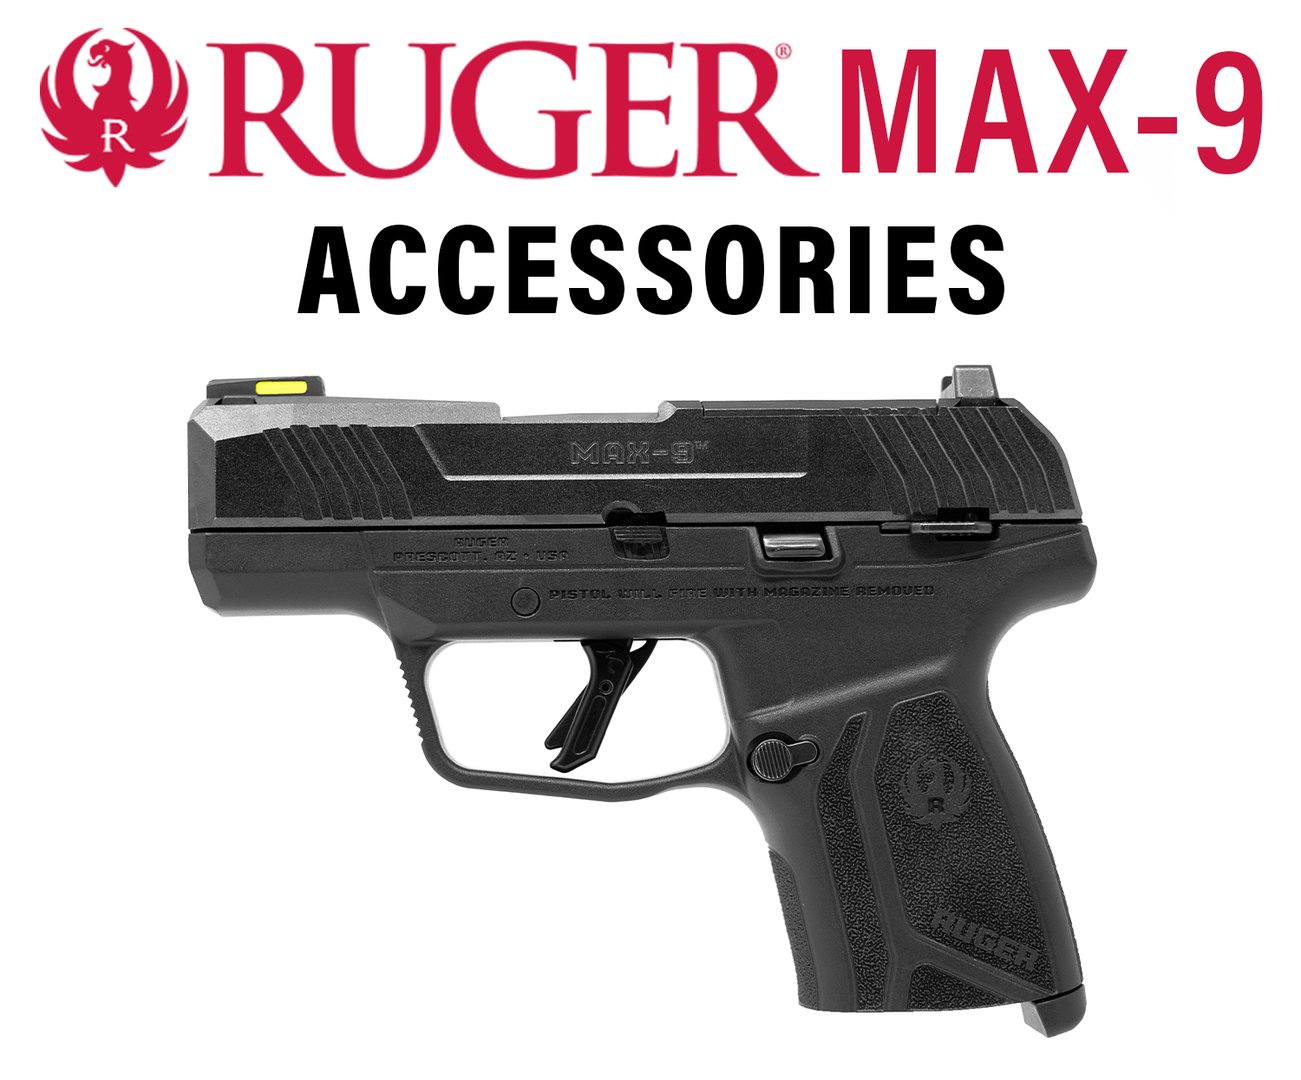 Ruger MAX-9 Accessories